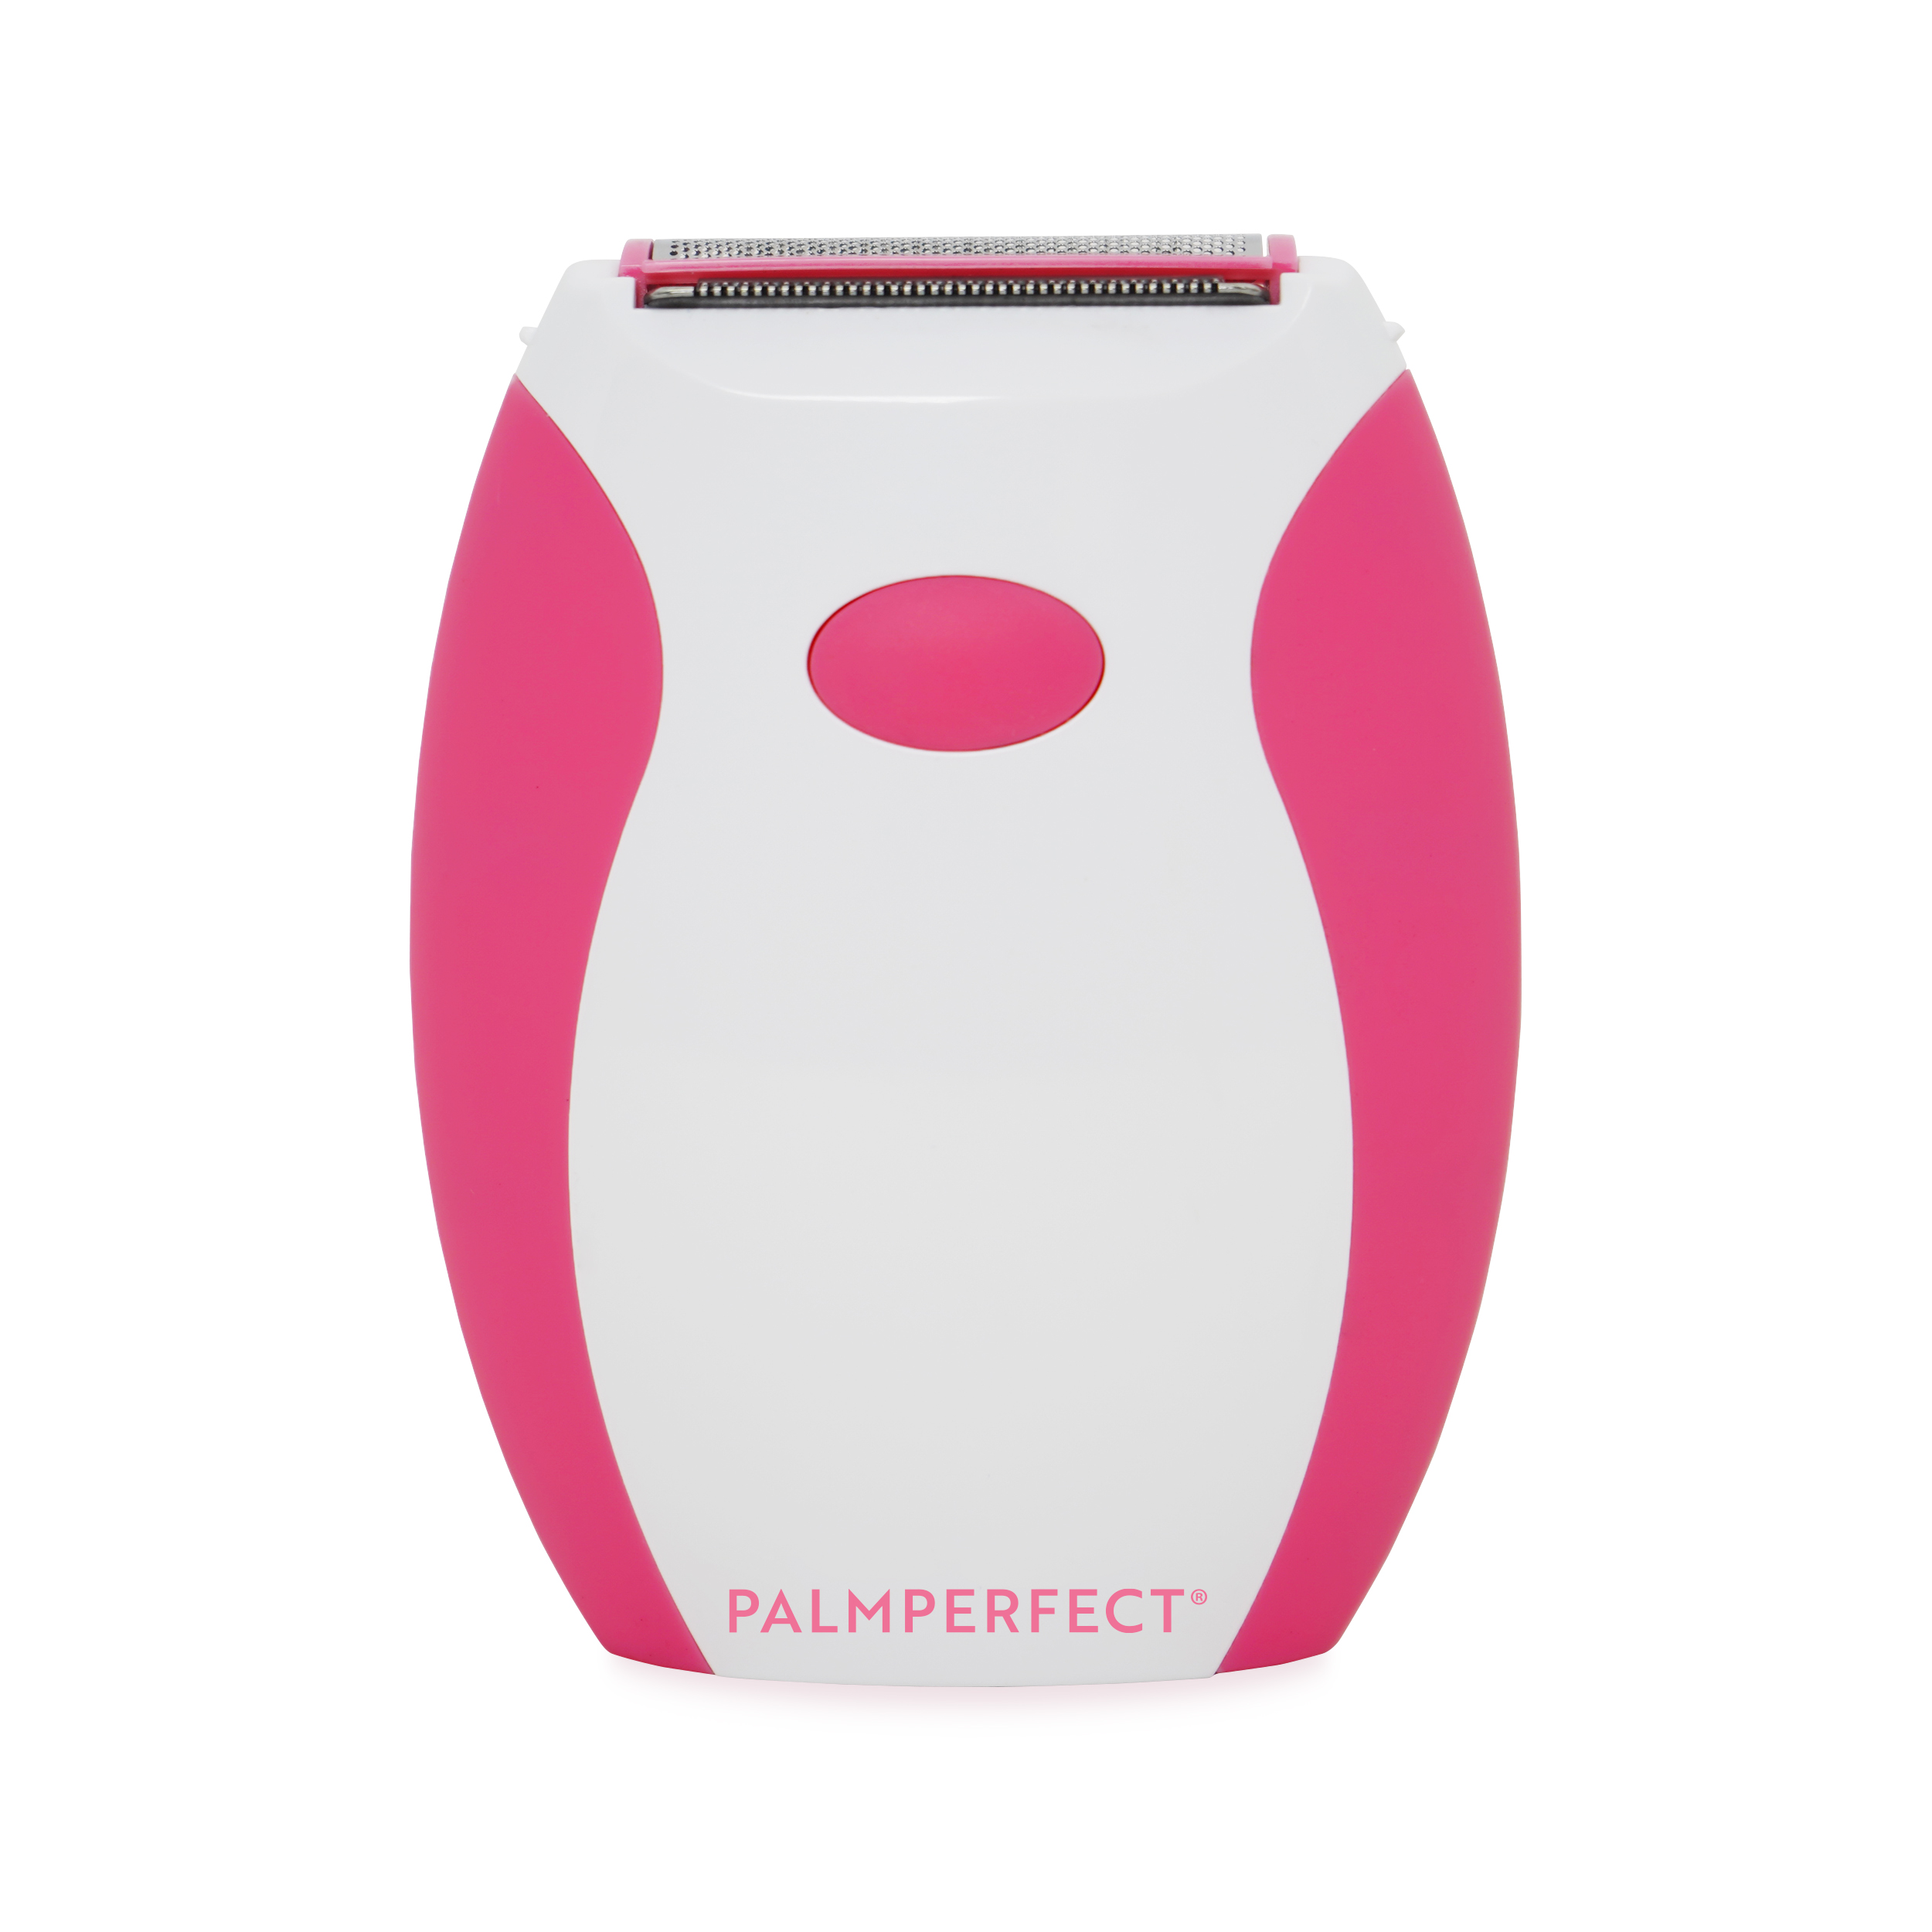 Palmperfect Electric Shaver, Female Electric Shavers, Battery Operated, Color and Pattern May Vary - image 1 of 19